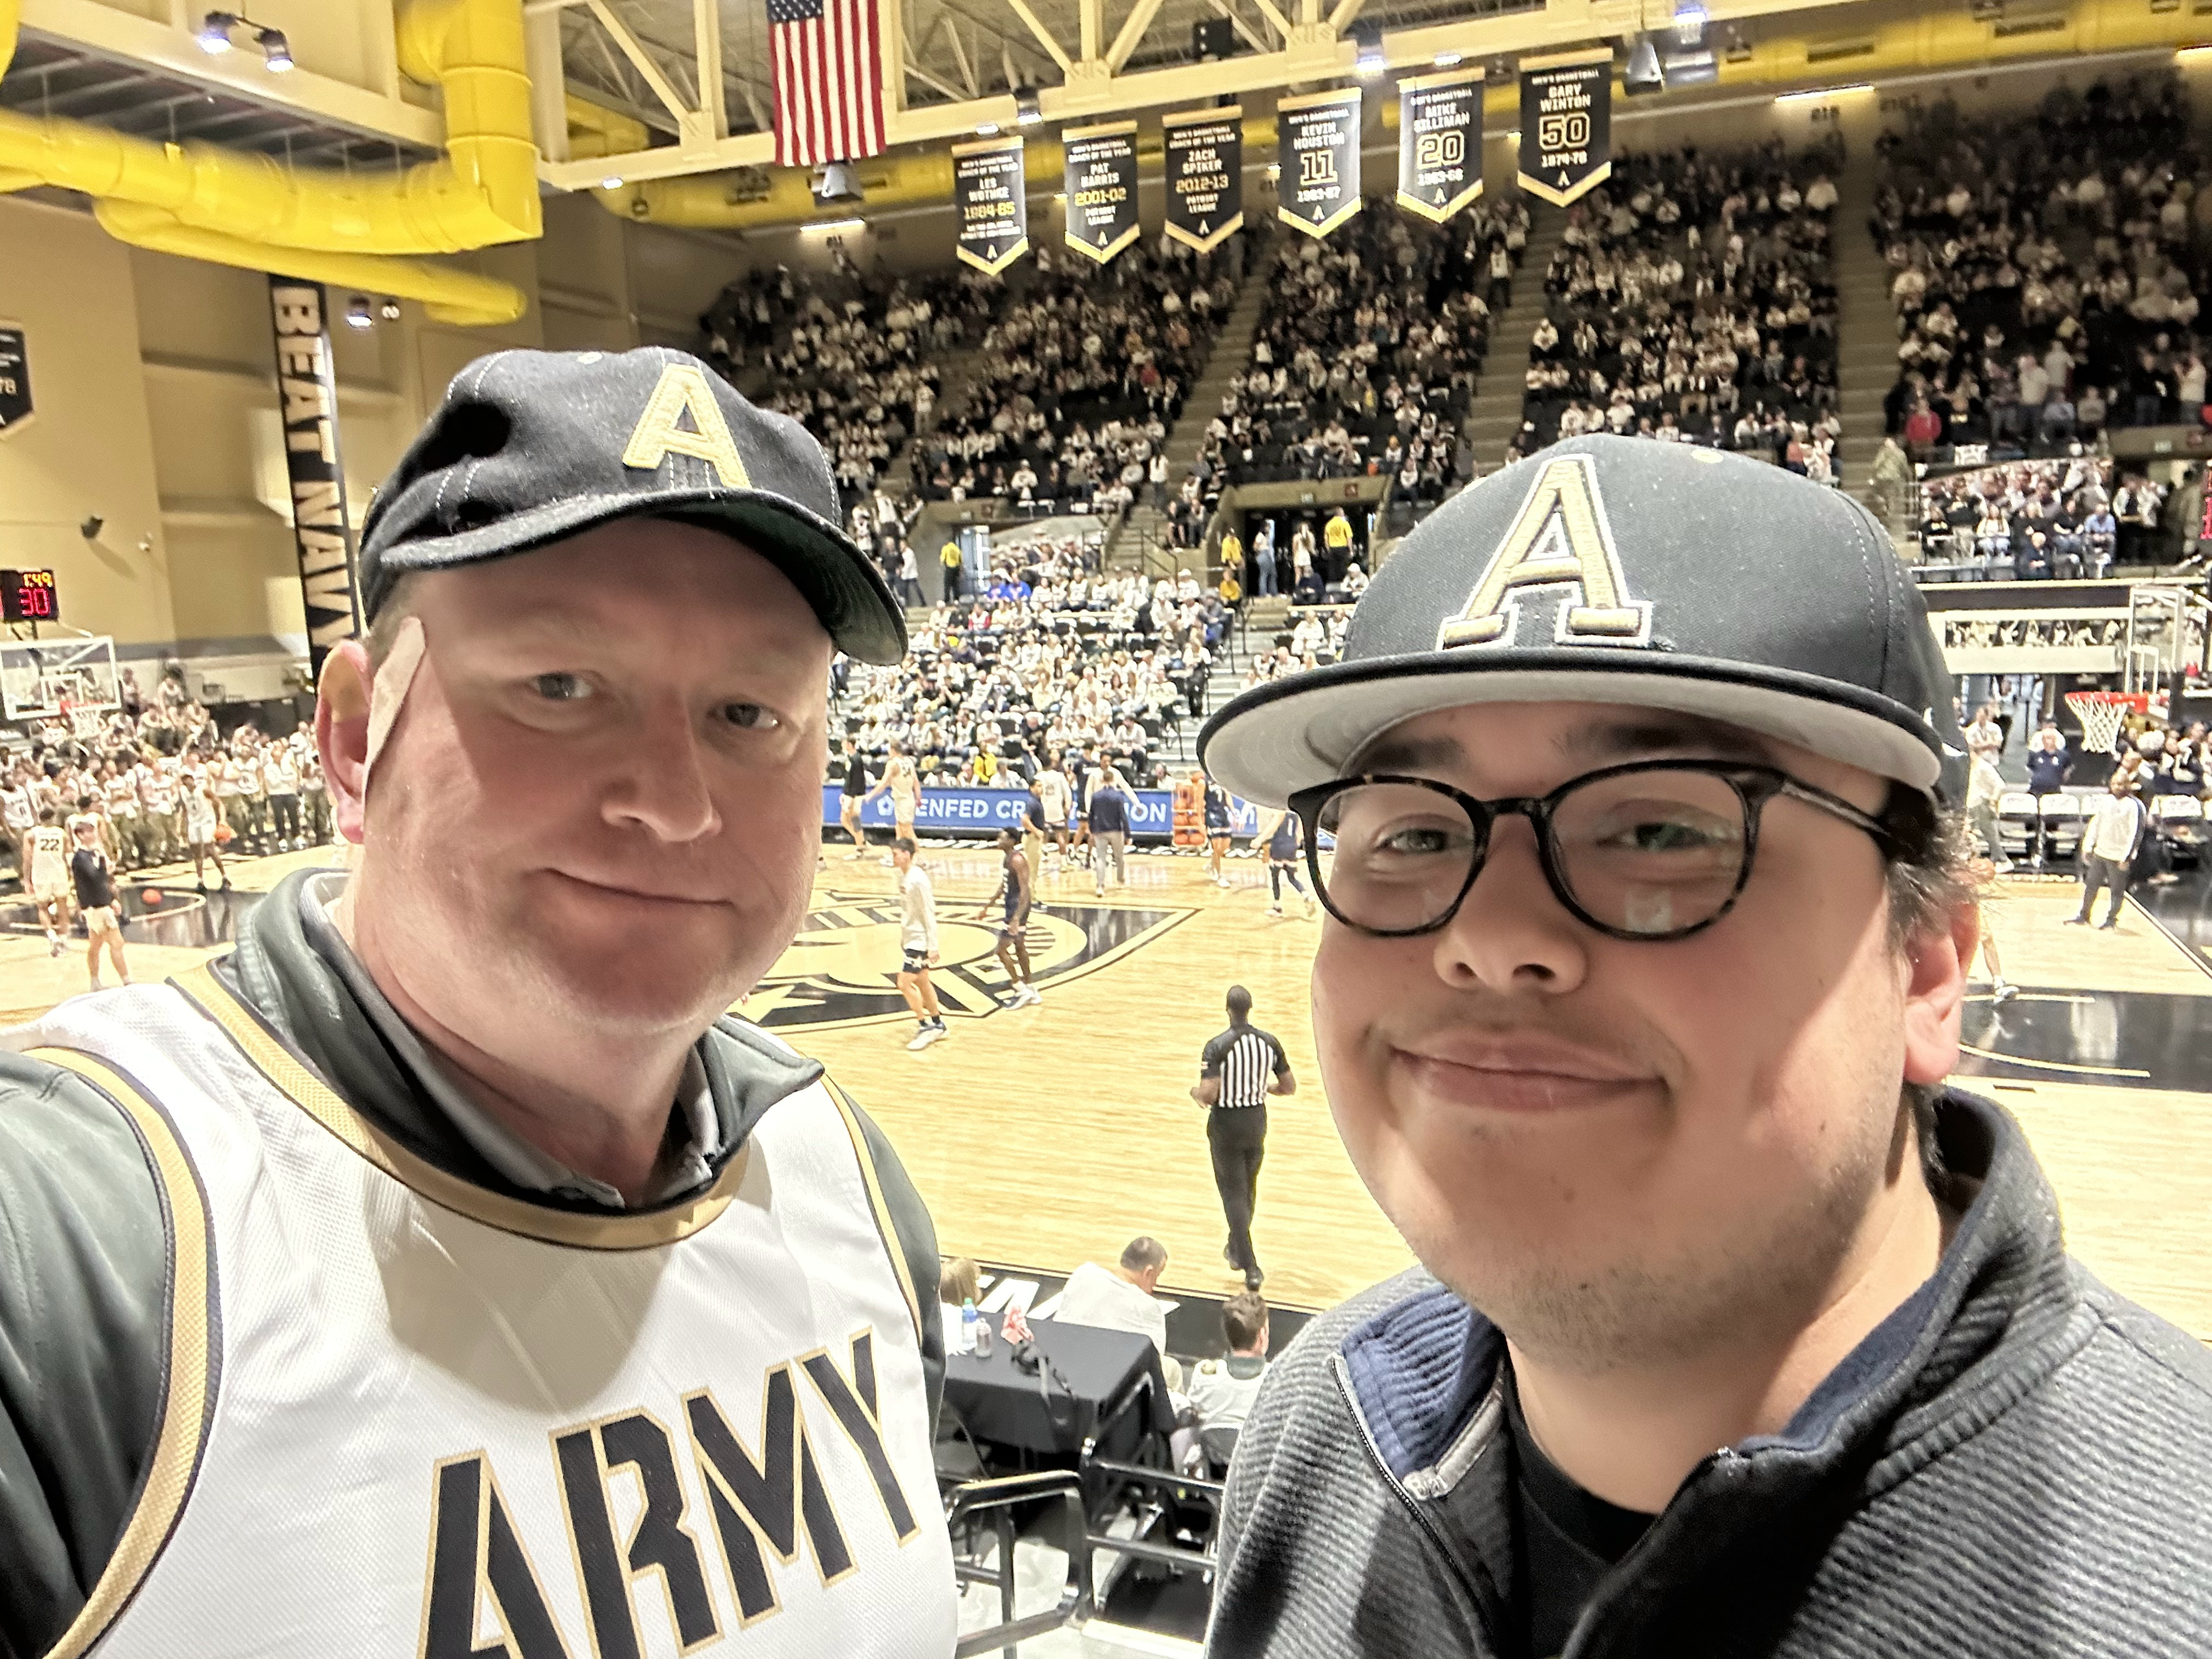 Army vs. Navy - Men's and Women's Basketball Doubleheader